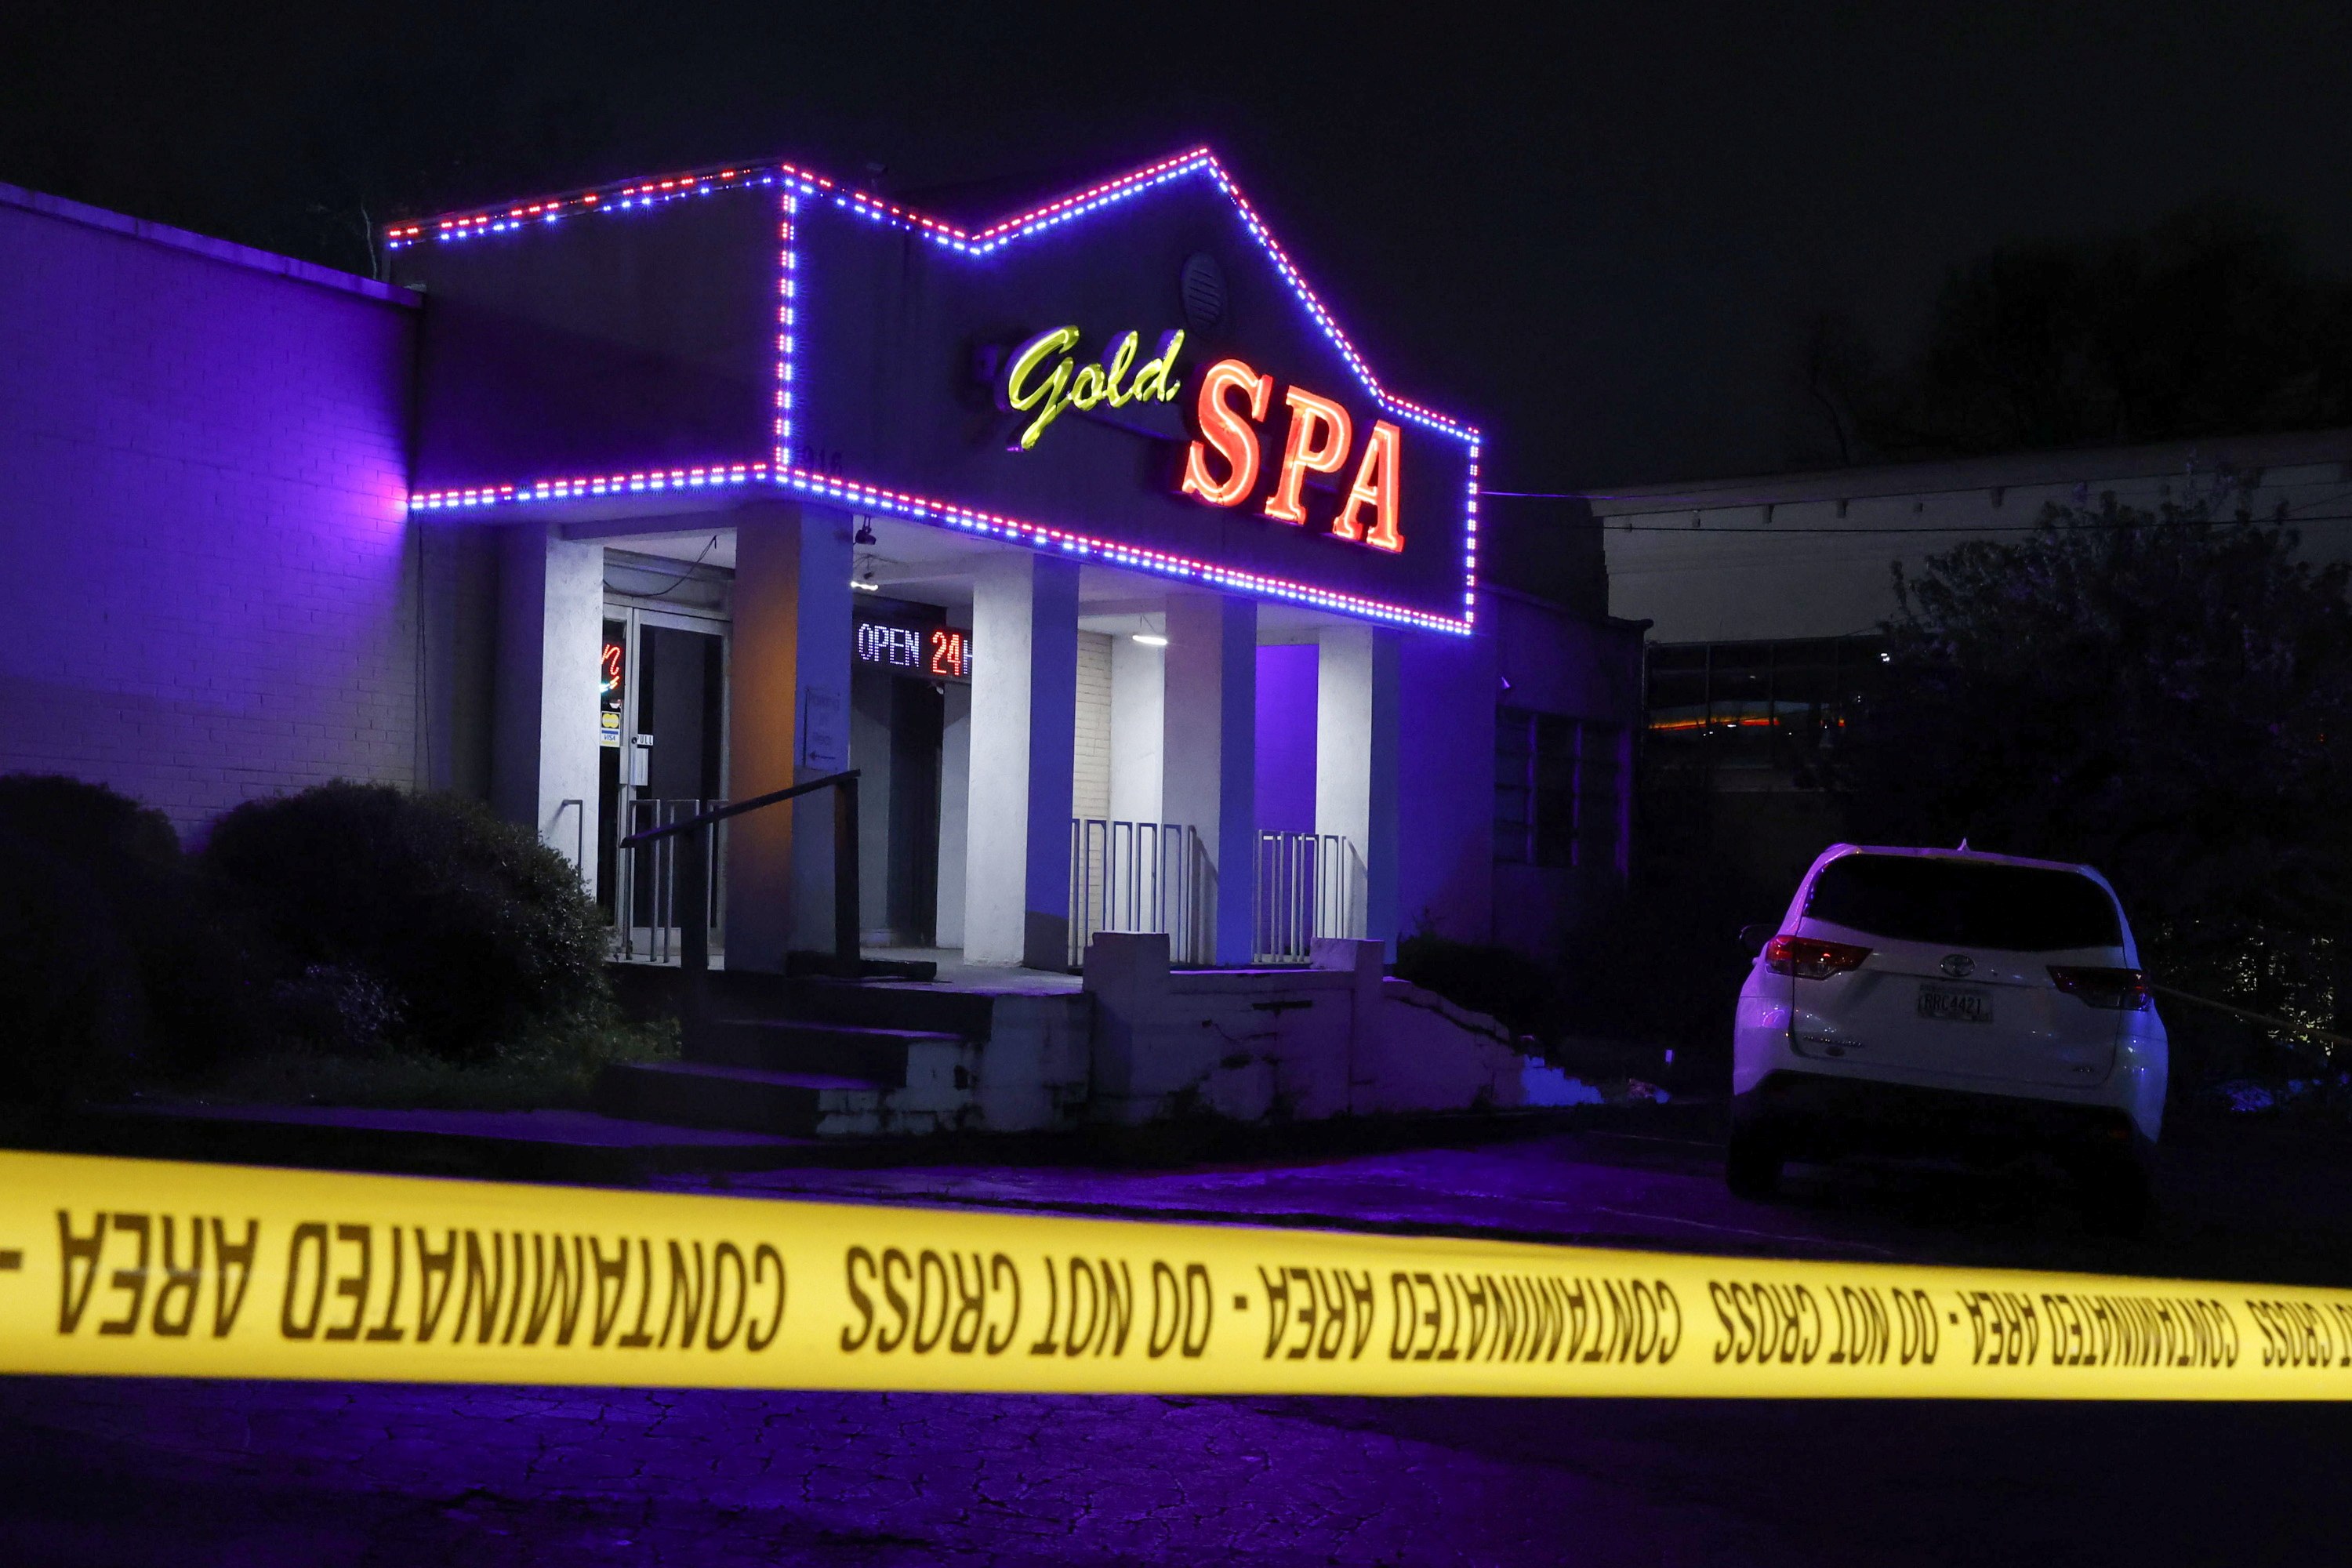 Crime scene tape surrounds Gold Spa after deadly shootings in Atlanta